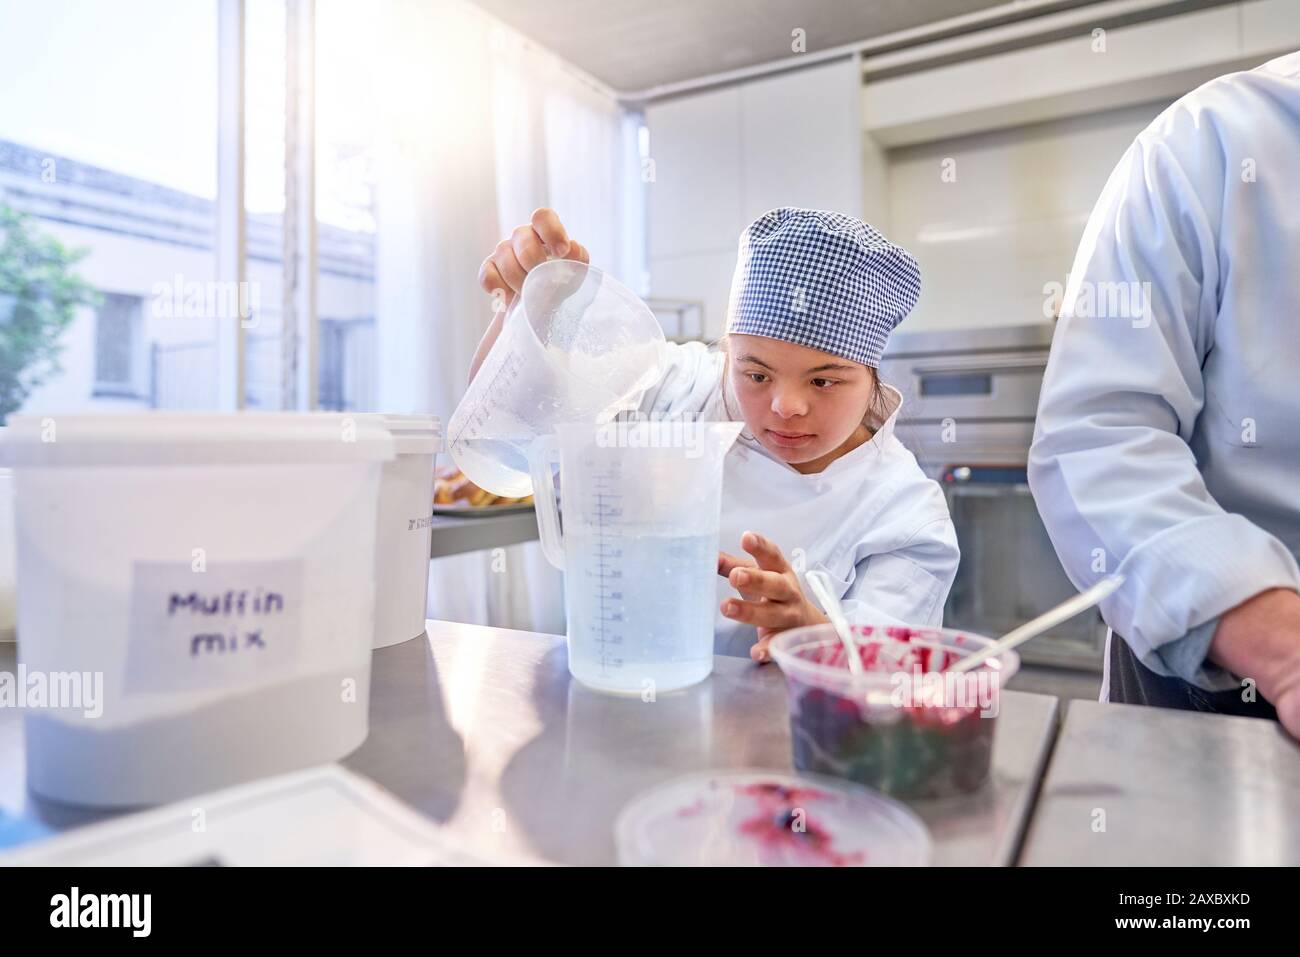 Focused young female student with Down Syndrome baking in kitchen Stock Photo